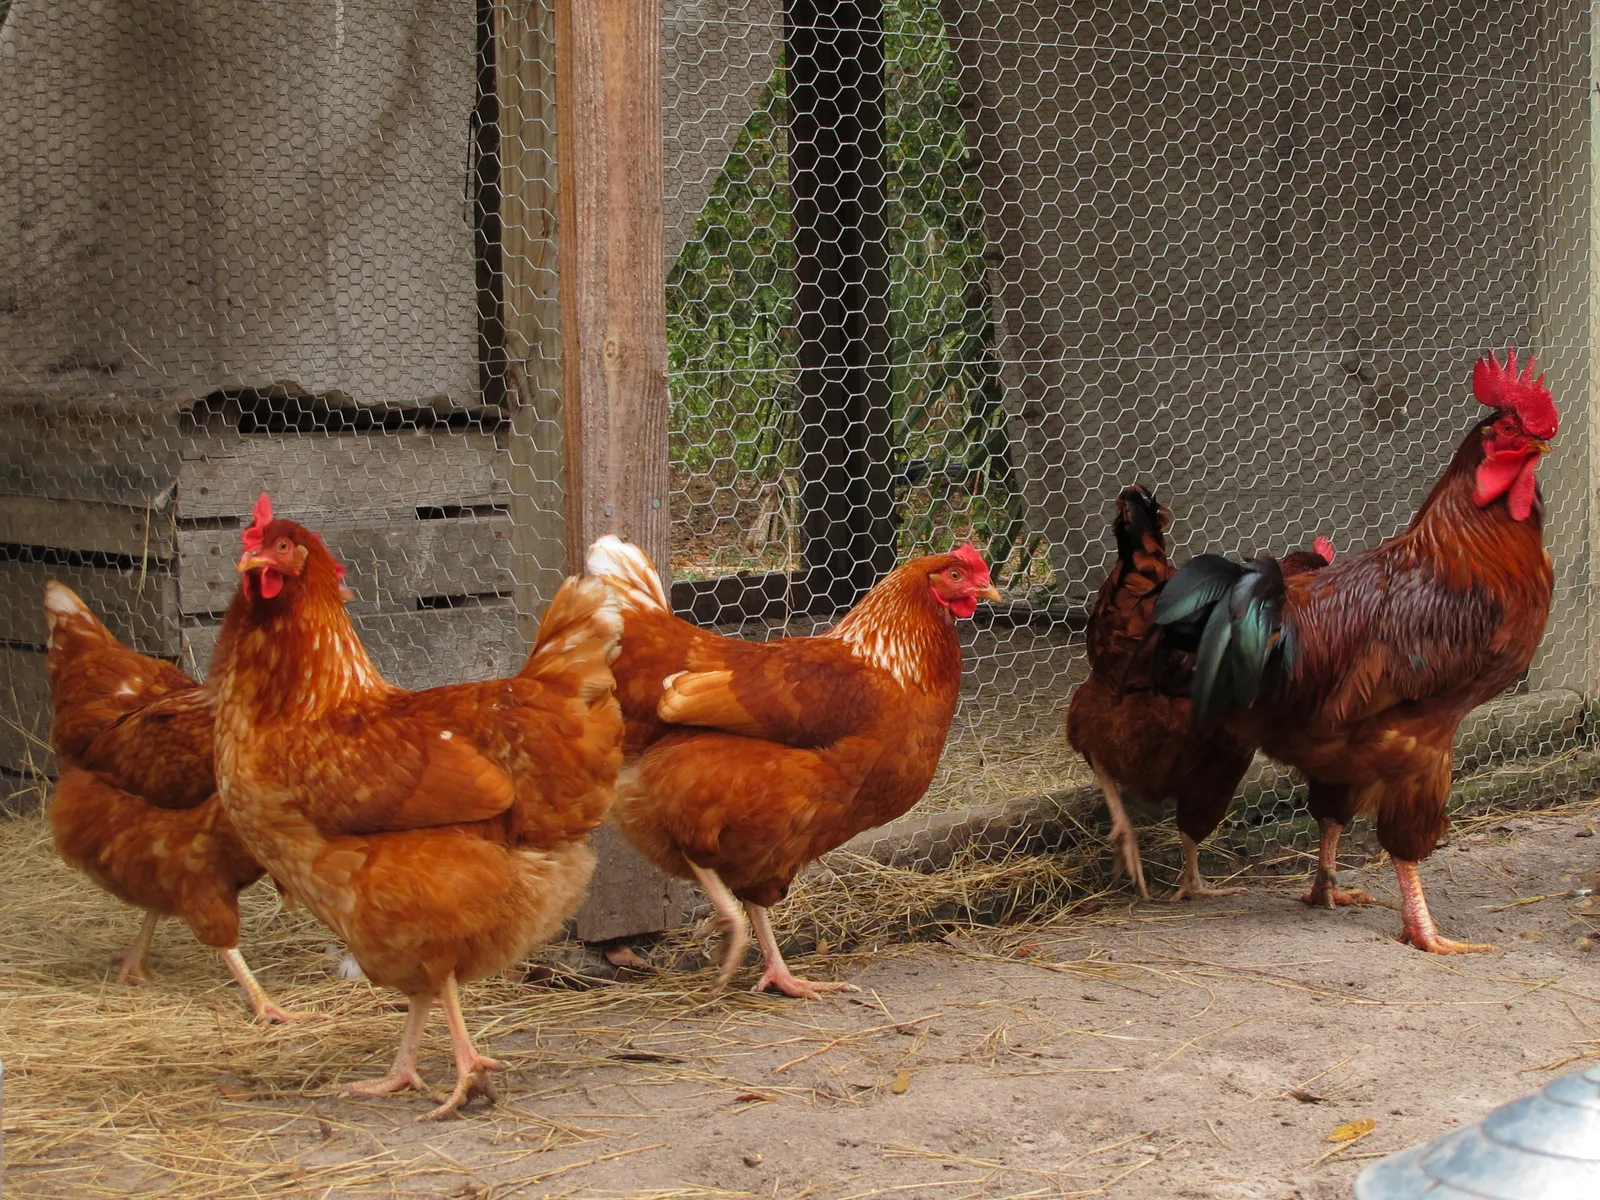 14 Fun Facts About Chickens | Science| Smithsonian Magazine